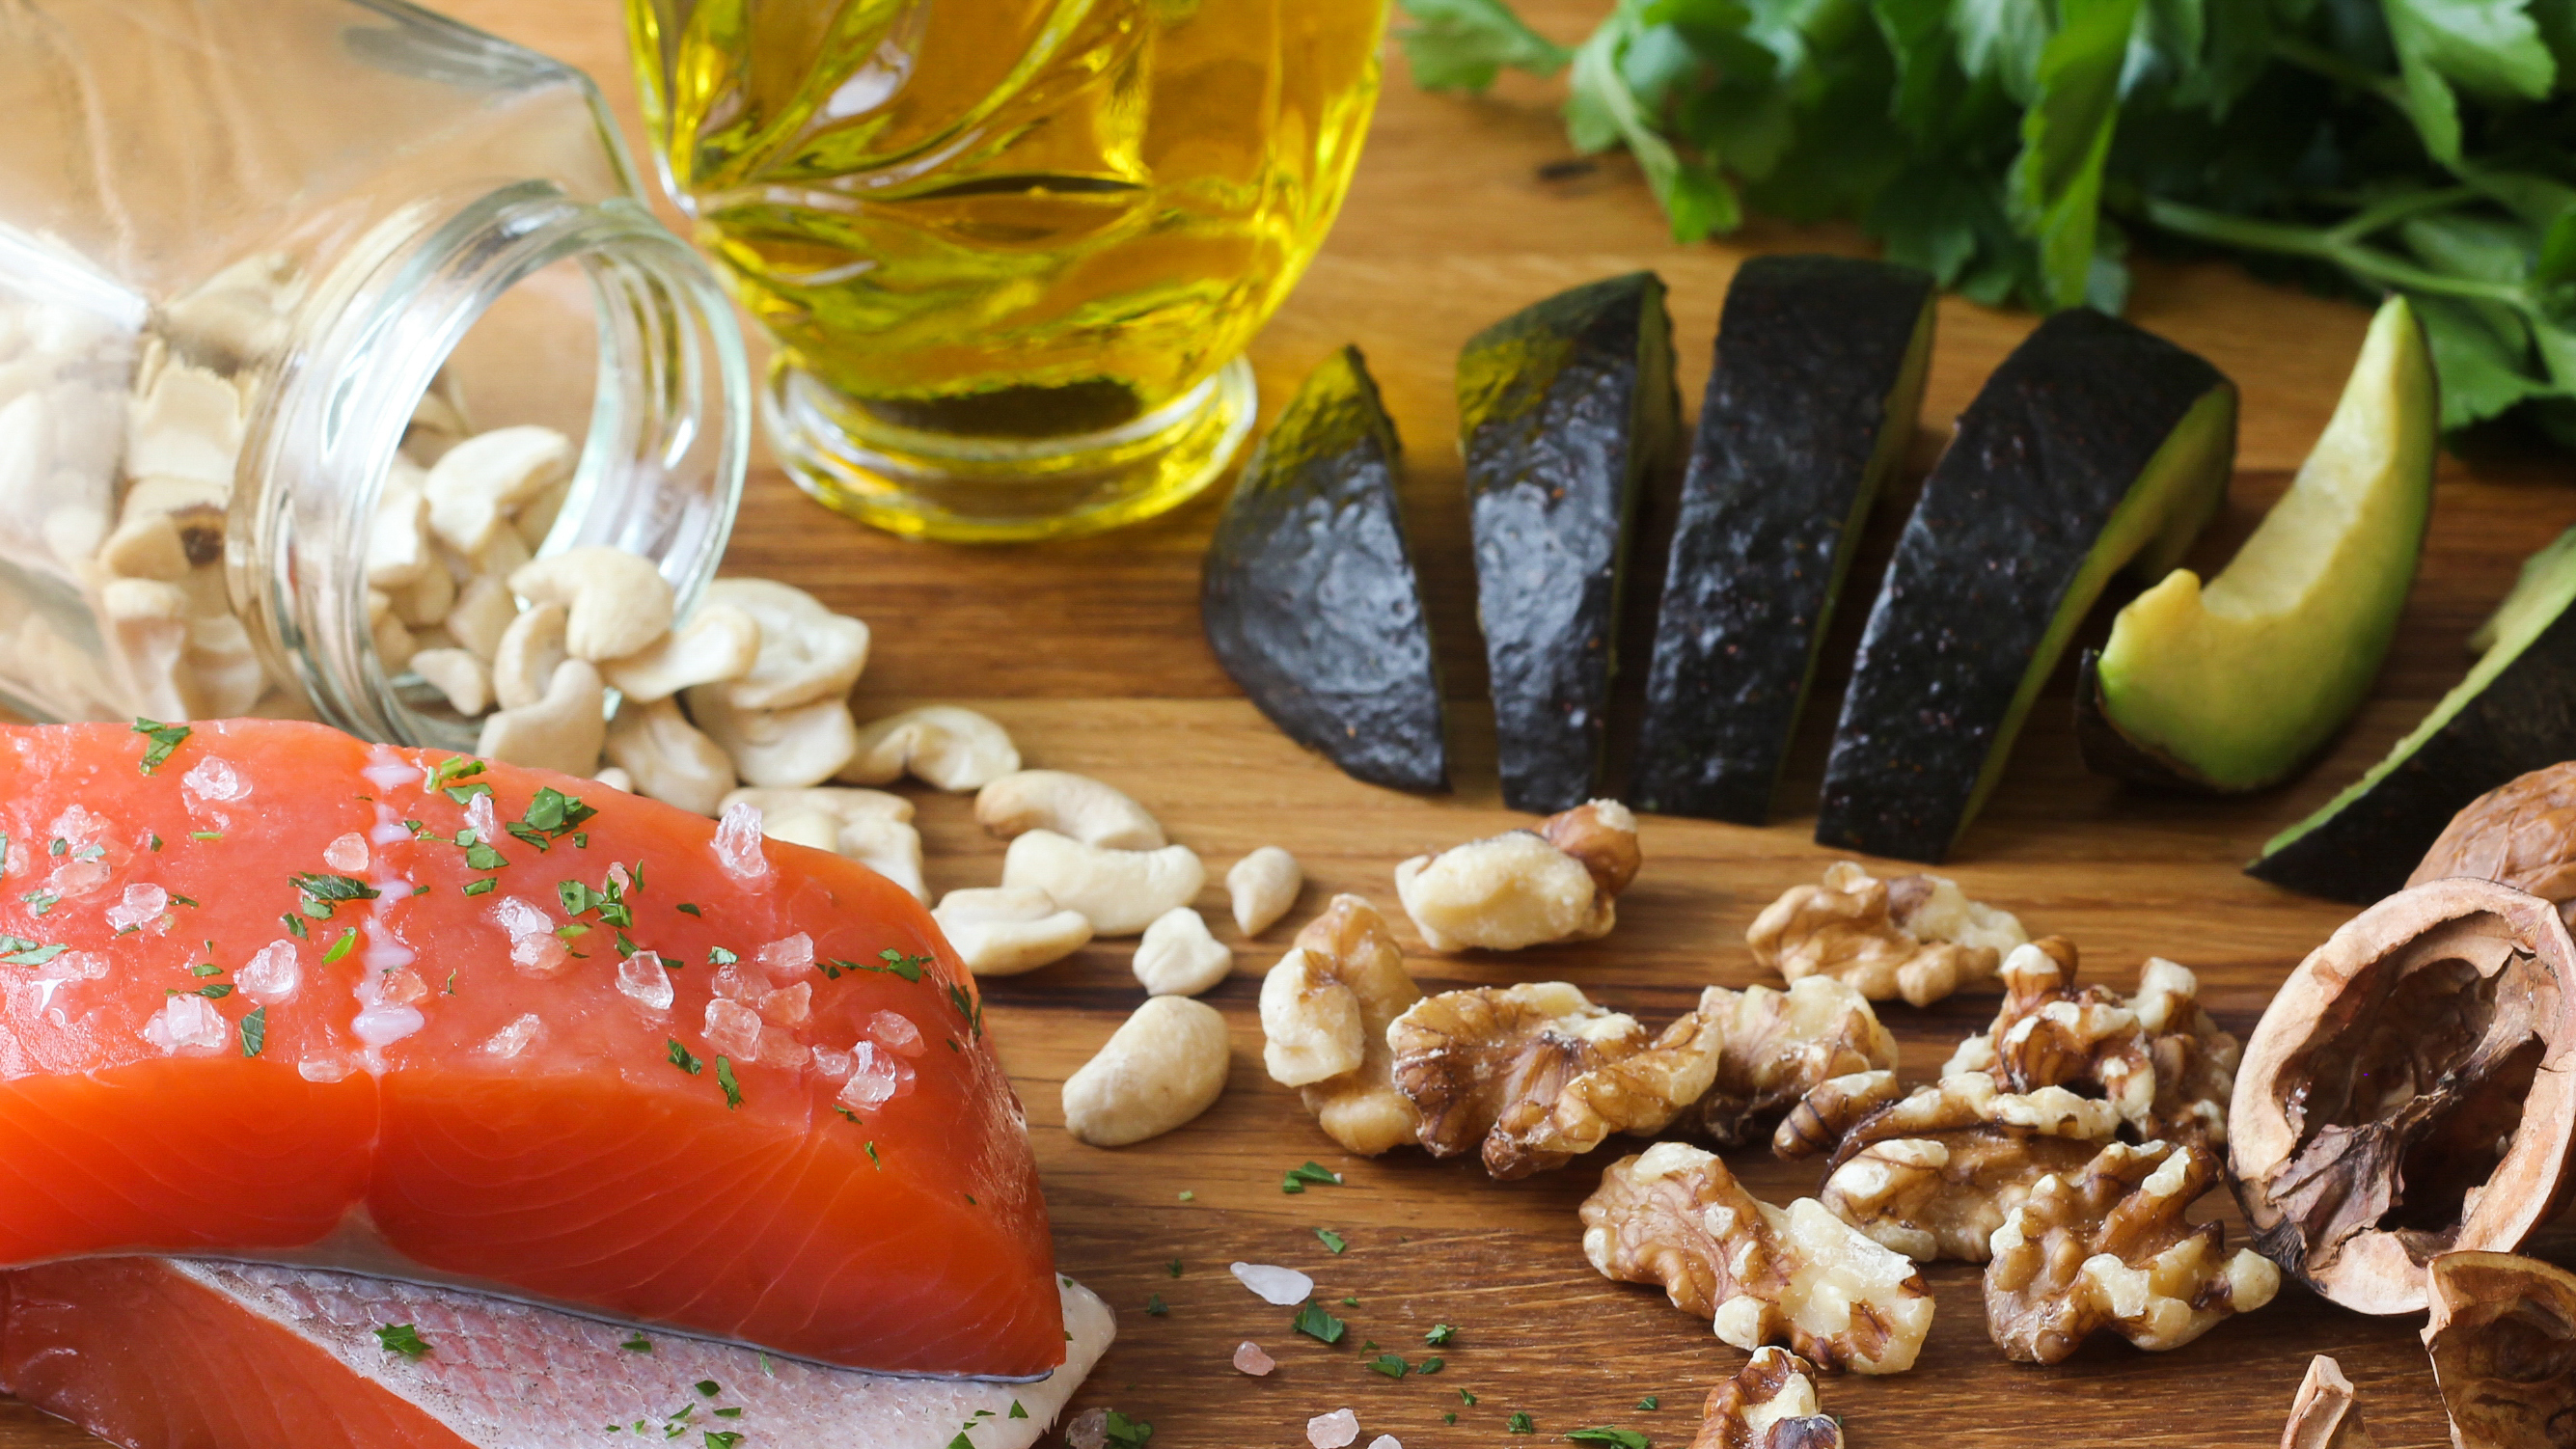 Deep-sea fish, avocado, nuts and olive oil are some of the sources of Omega 3 that protect the heart (Getty)